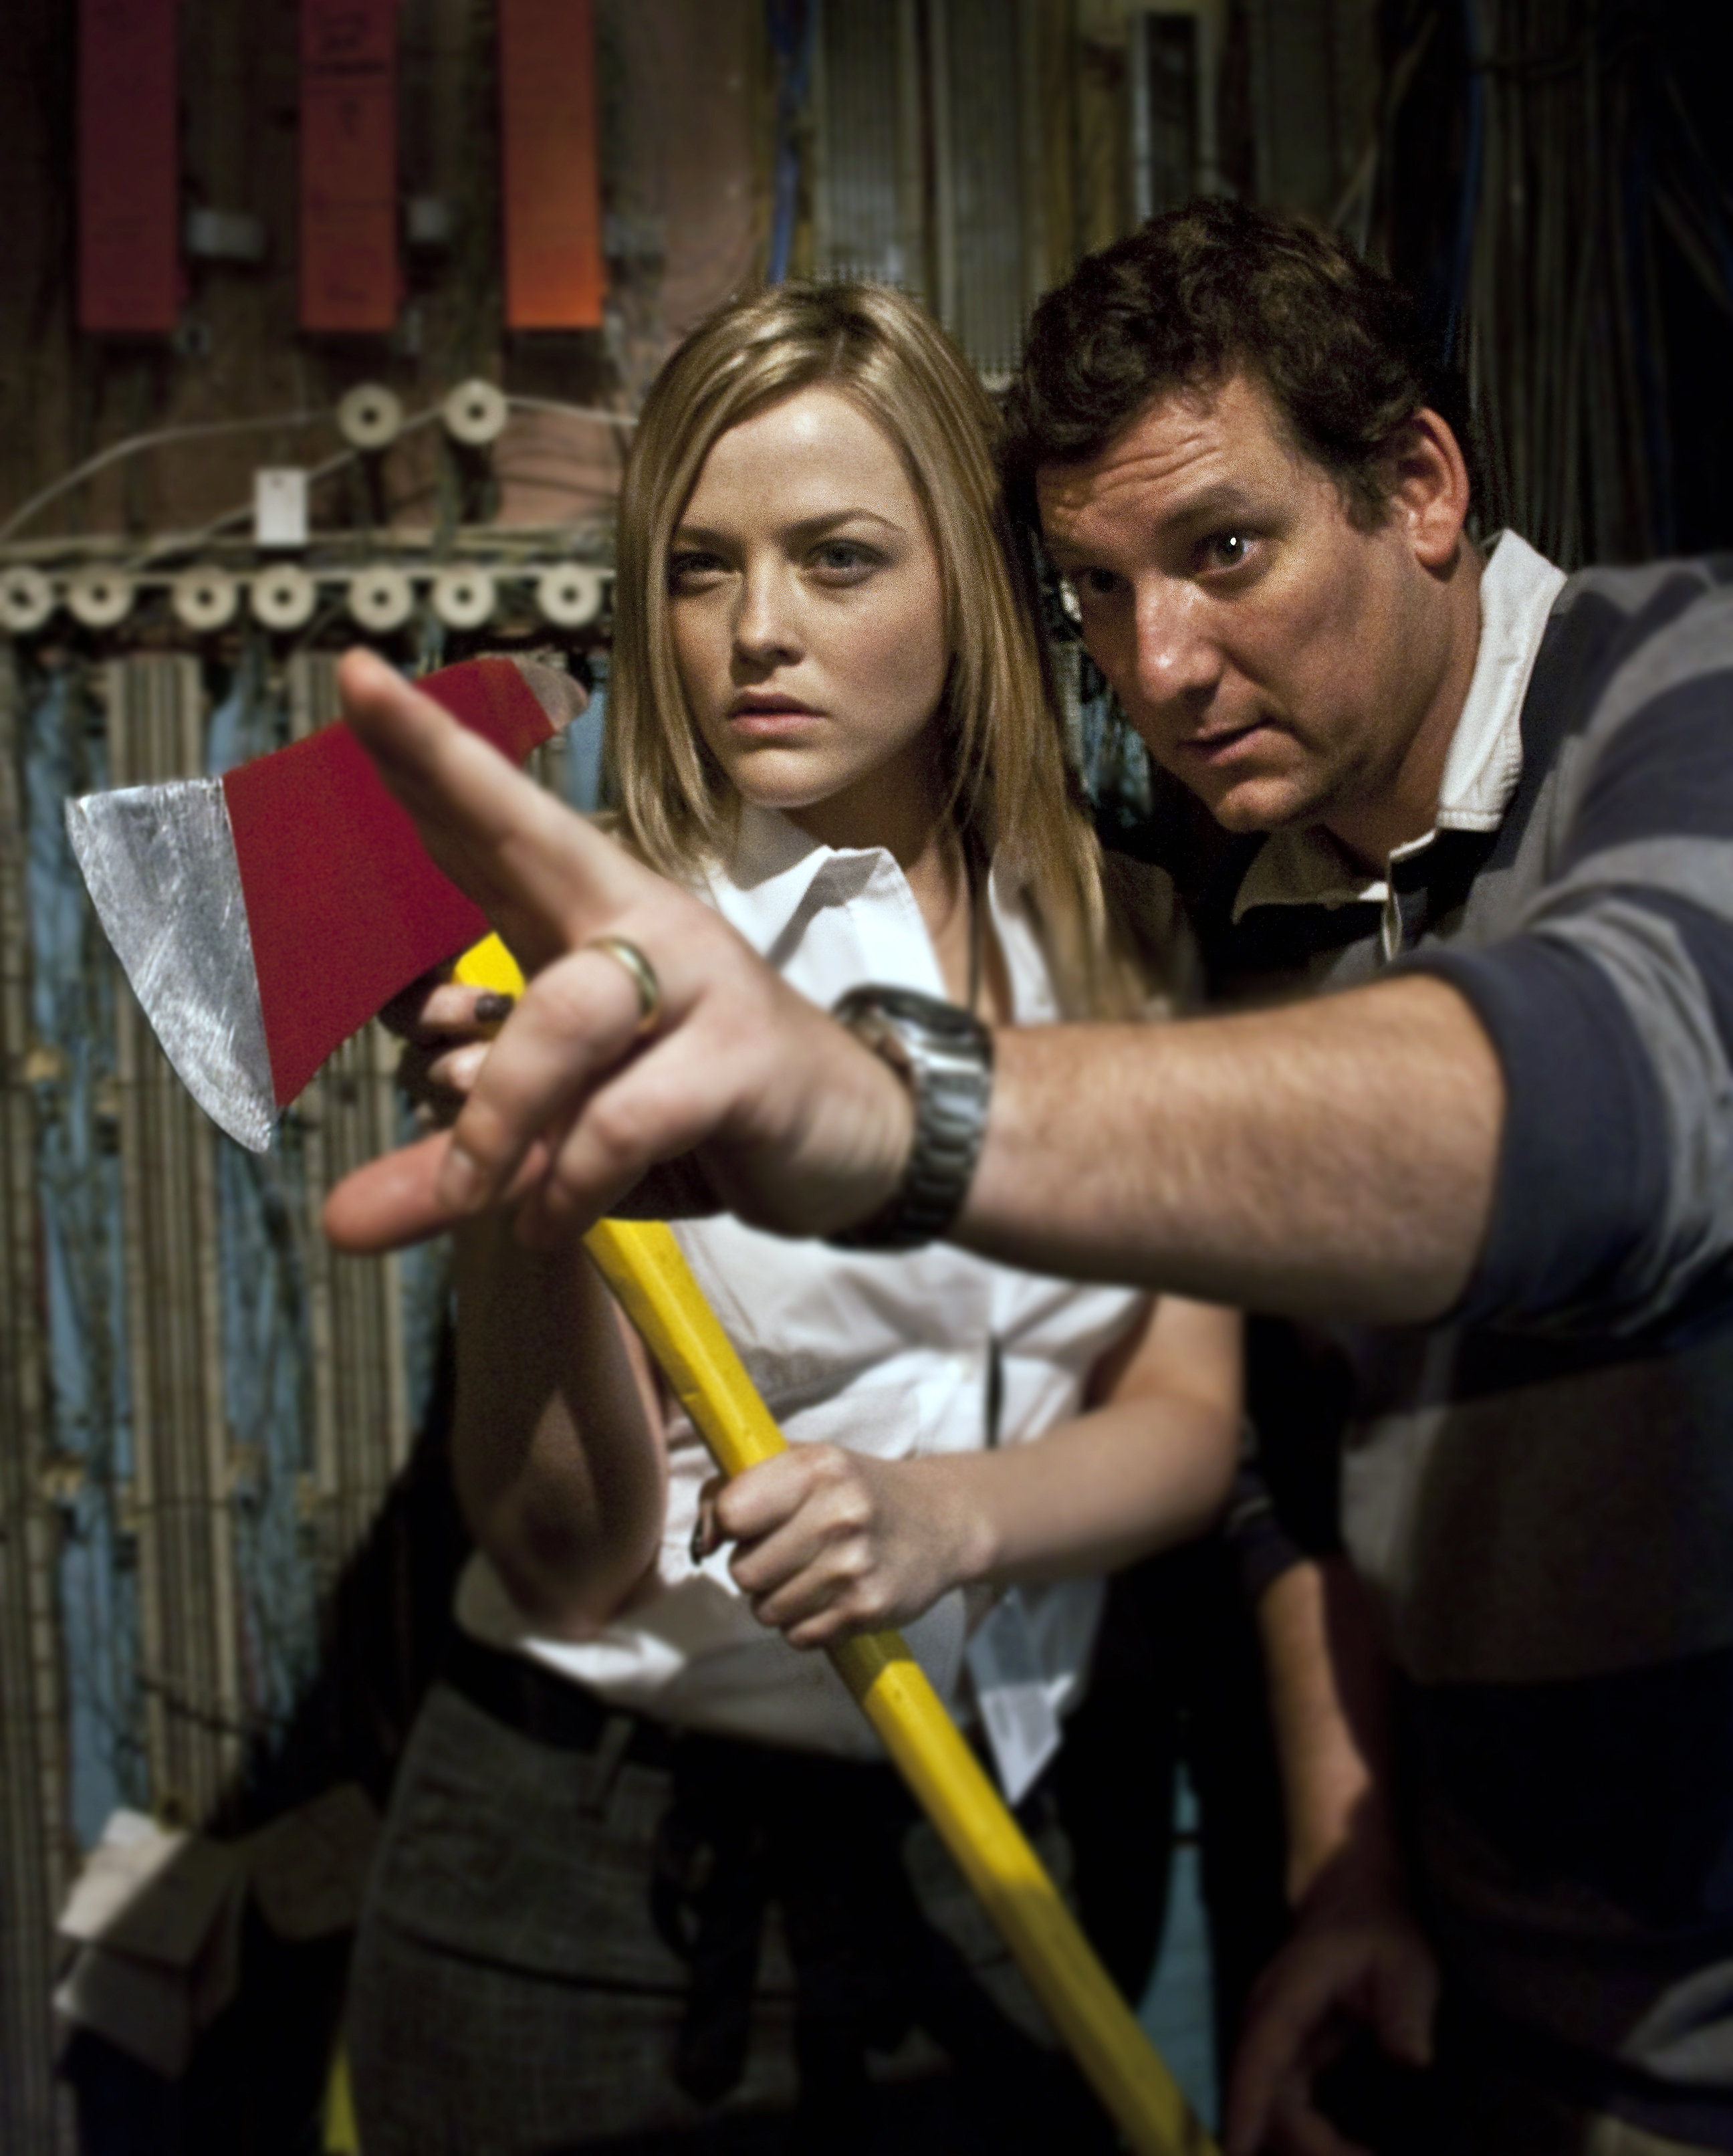 Dan Lantz directs Alexis Texas in the Horror/Comedy feature film 